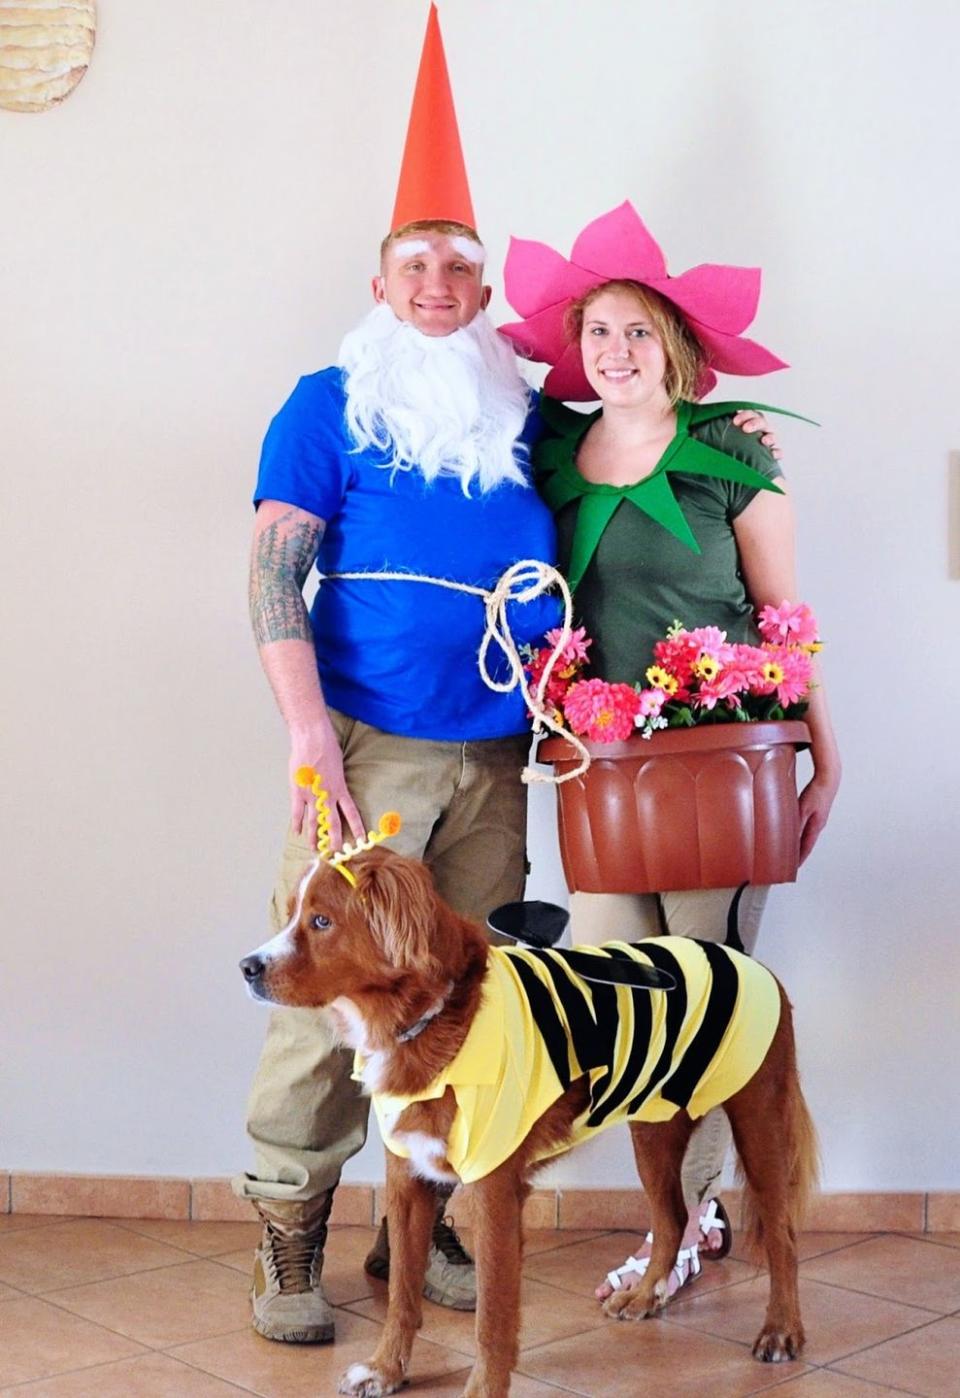 6) Garden Gnome, Flower, and Bee Costumes for Dog and Owners